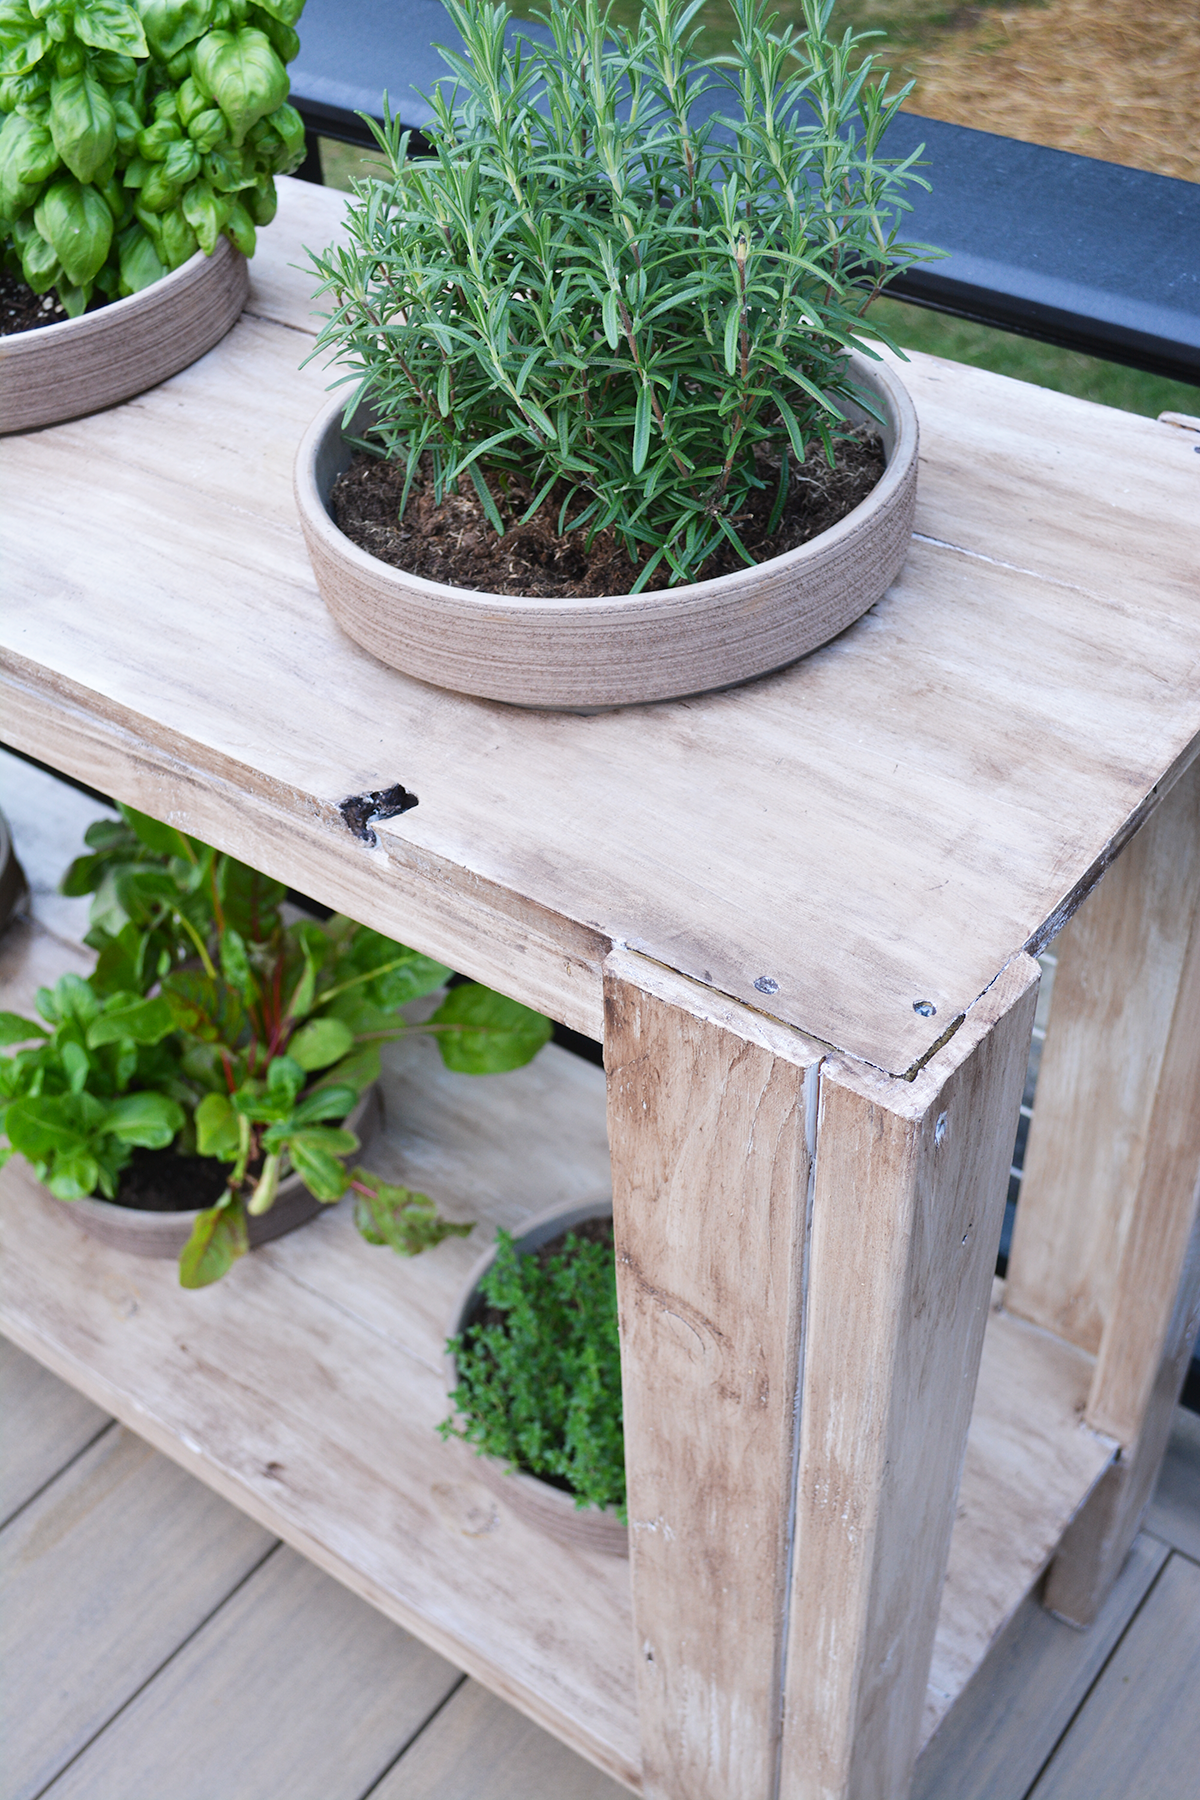 Building a Herbal Table